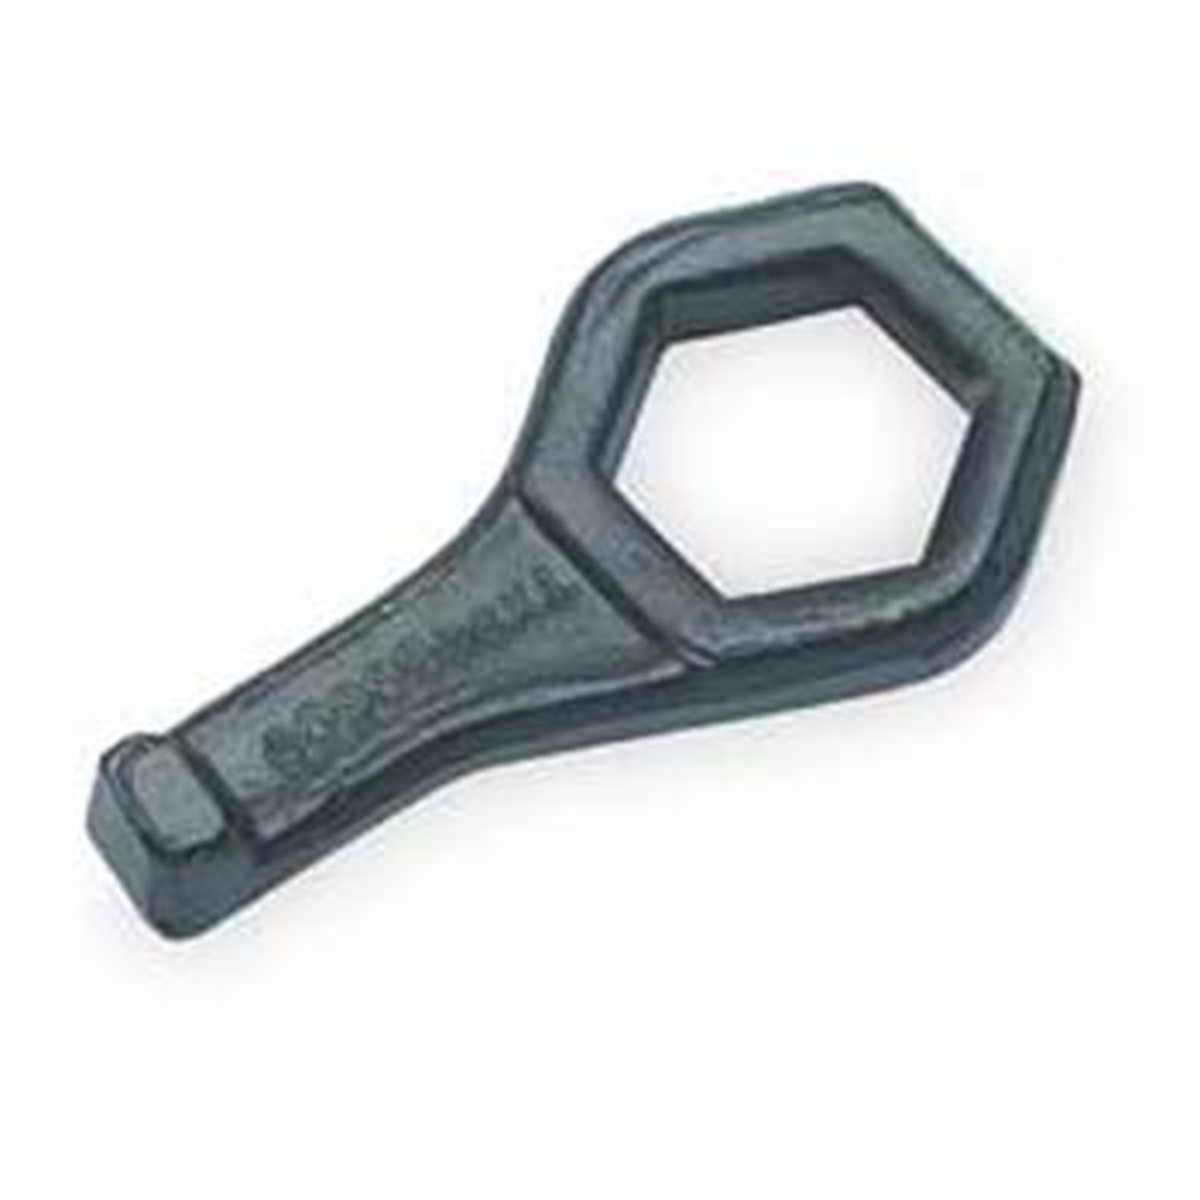 TX10 35mm Cap Nut Wrench